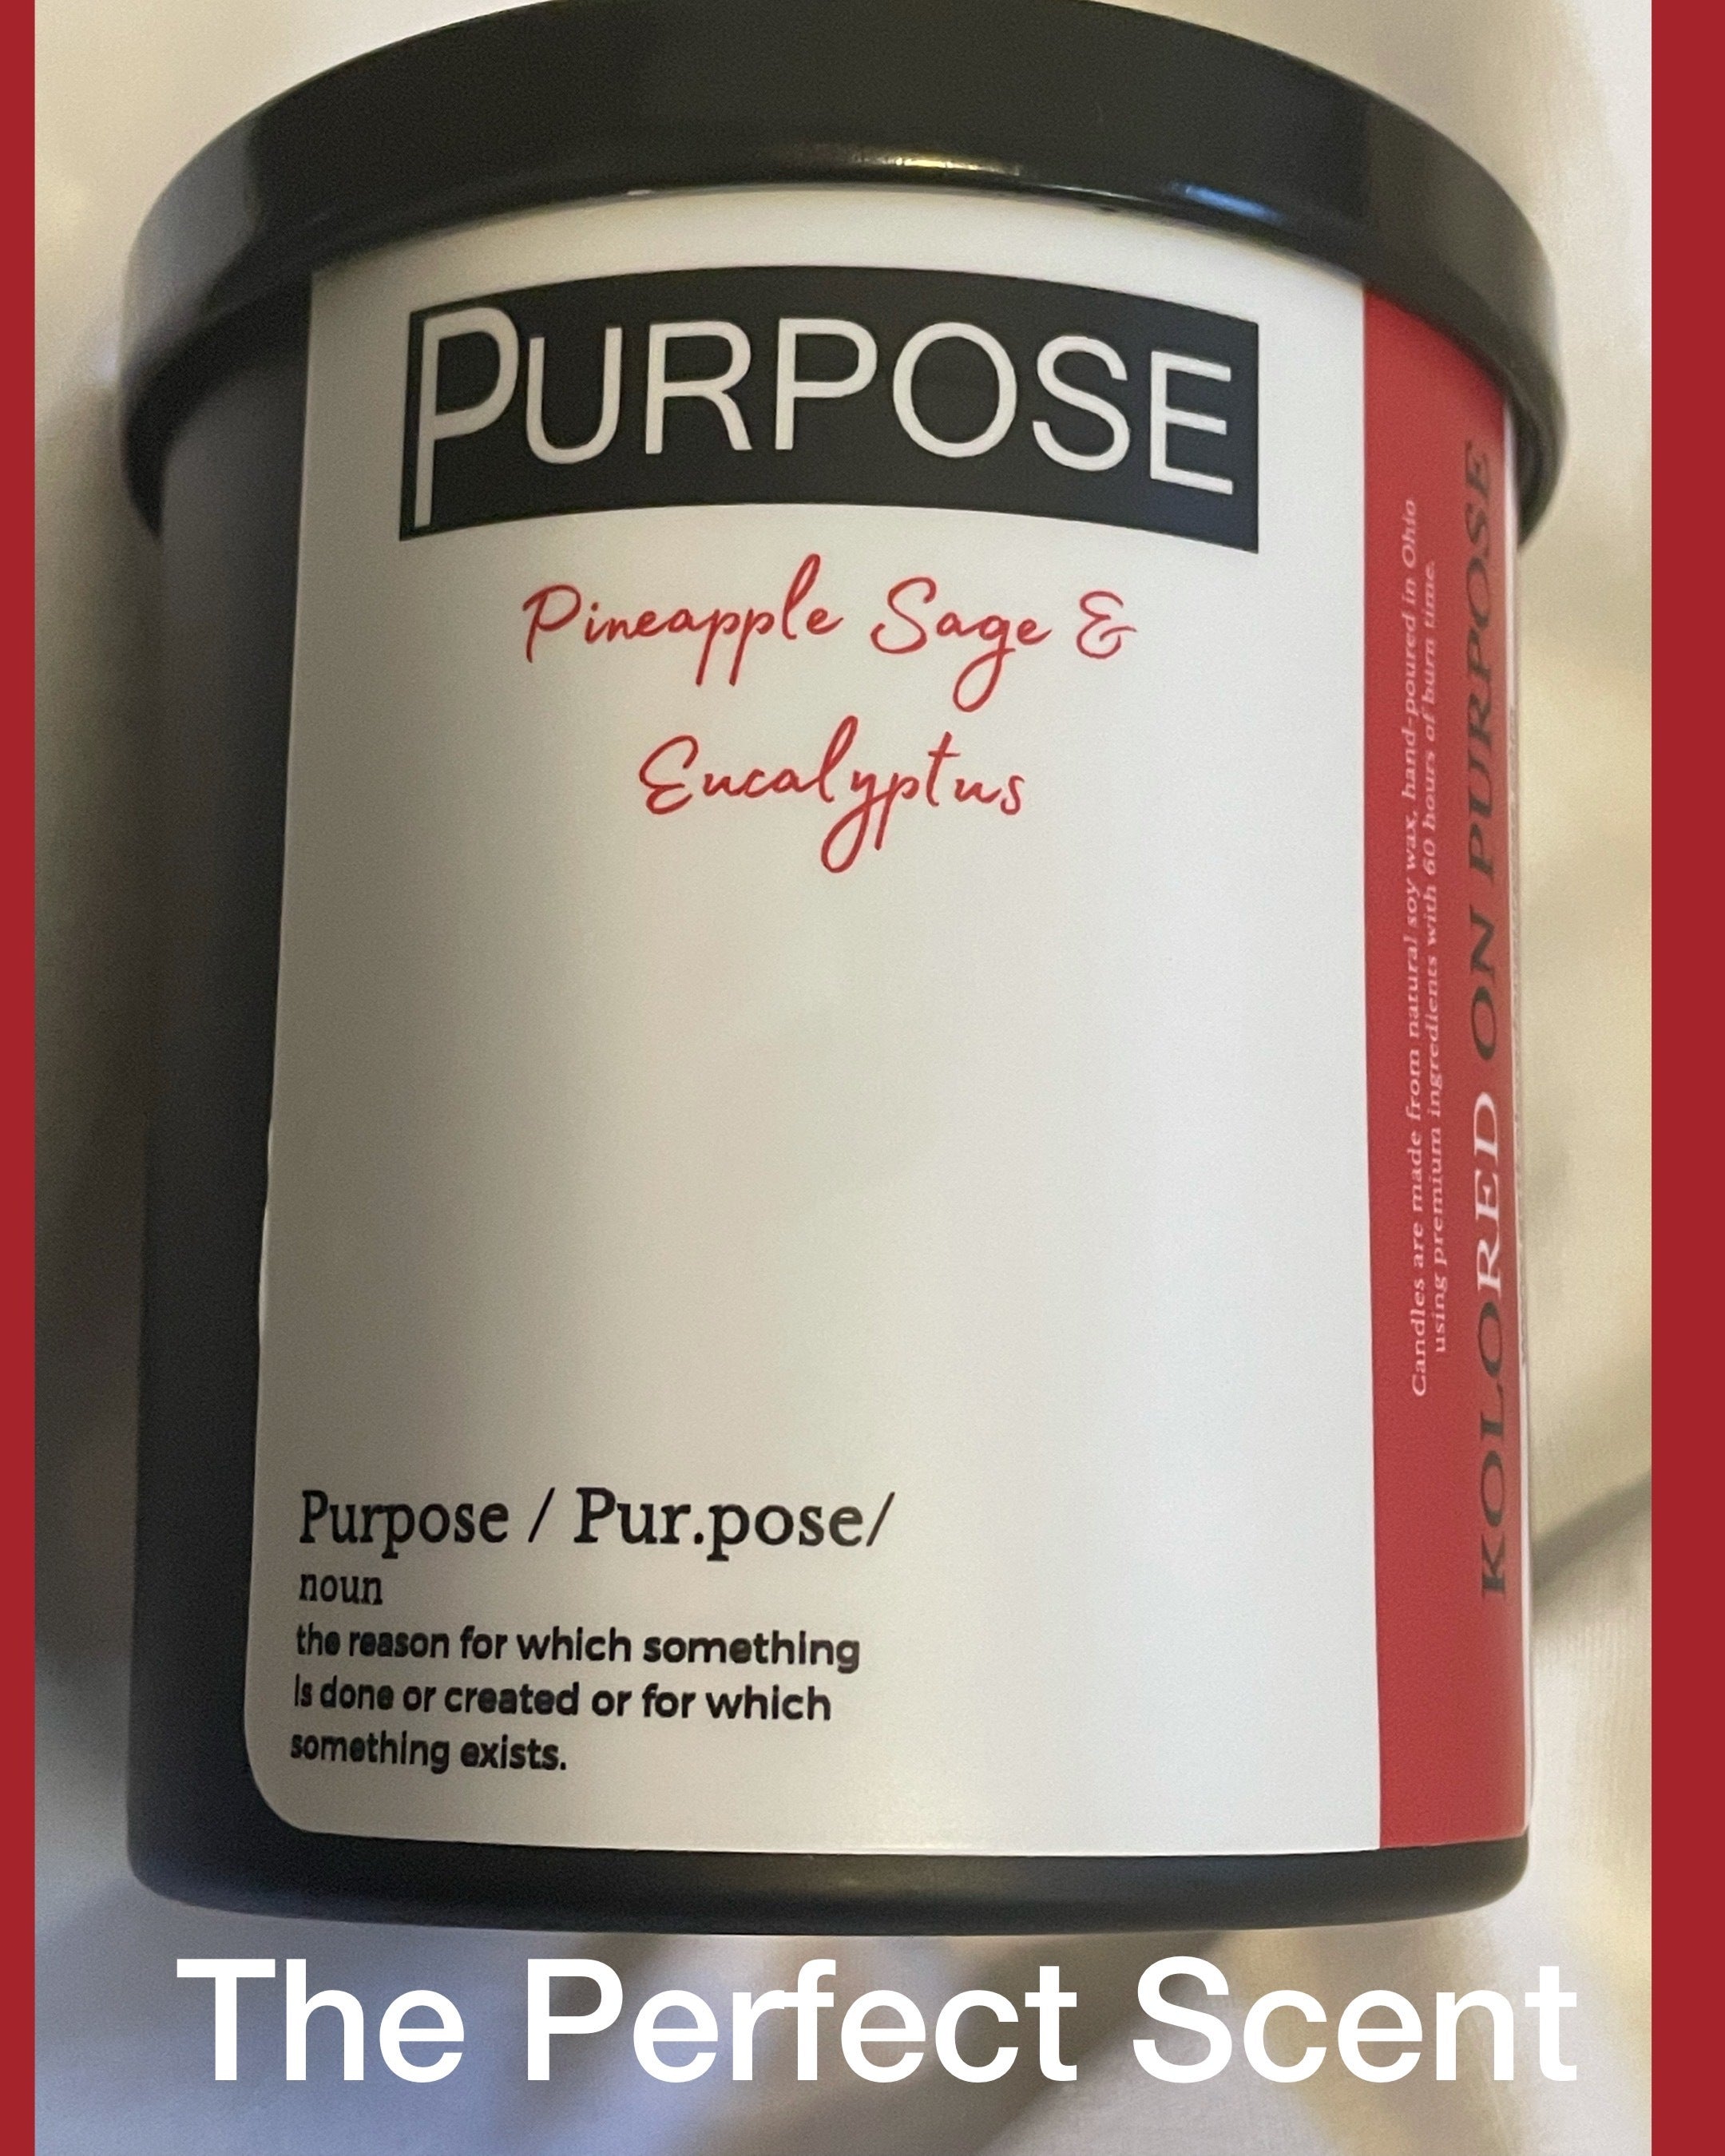 The Purpose Candle